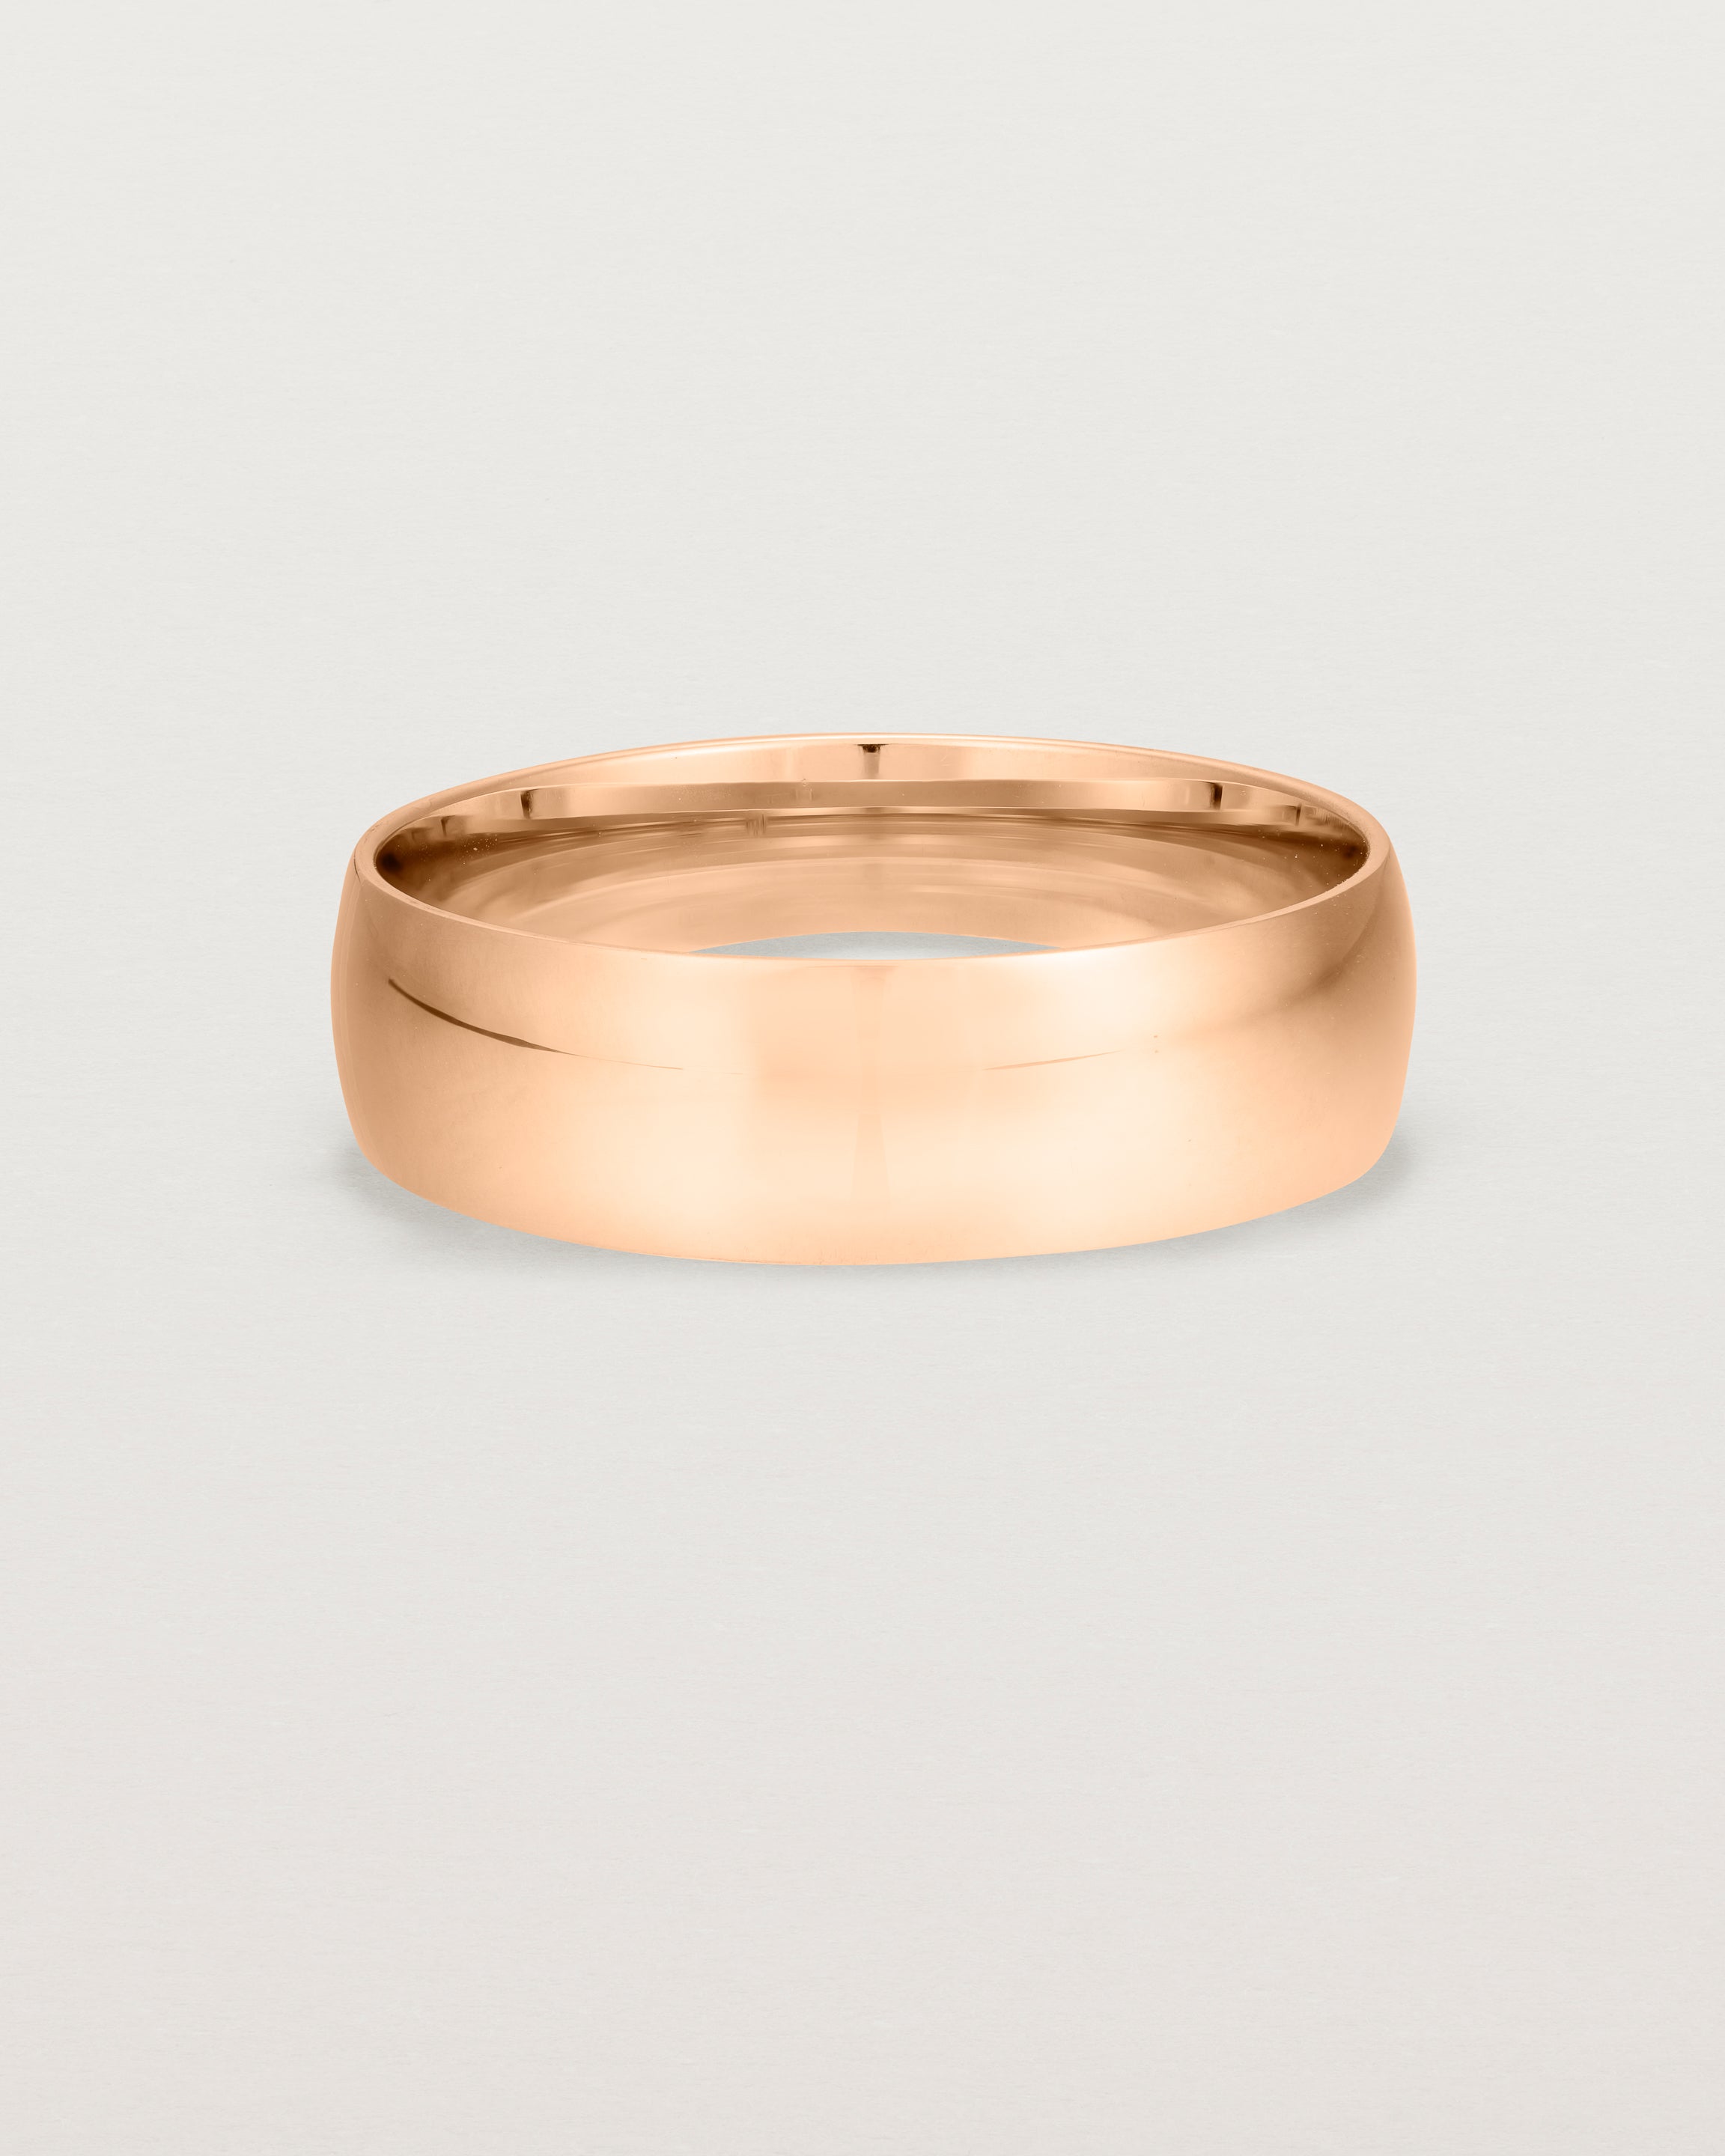 A bold 6mm wedding band crafted in rose gold